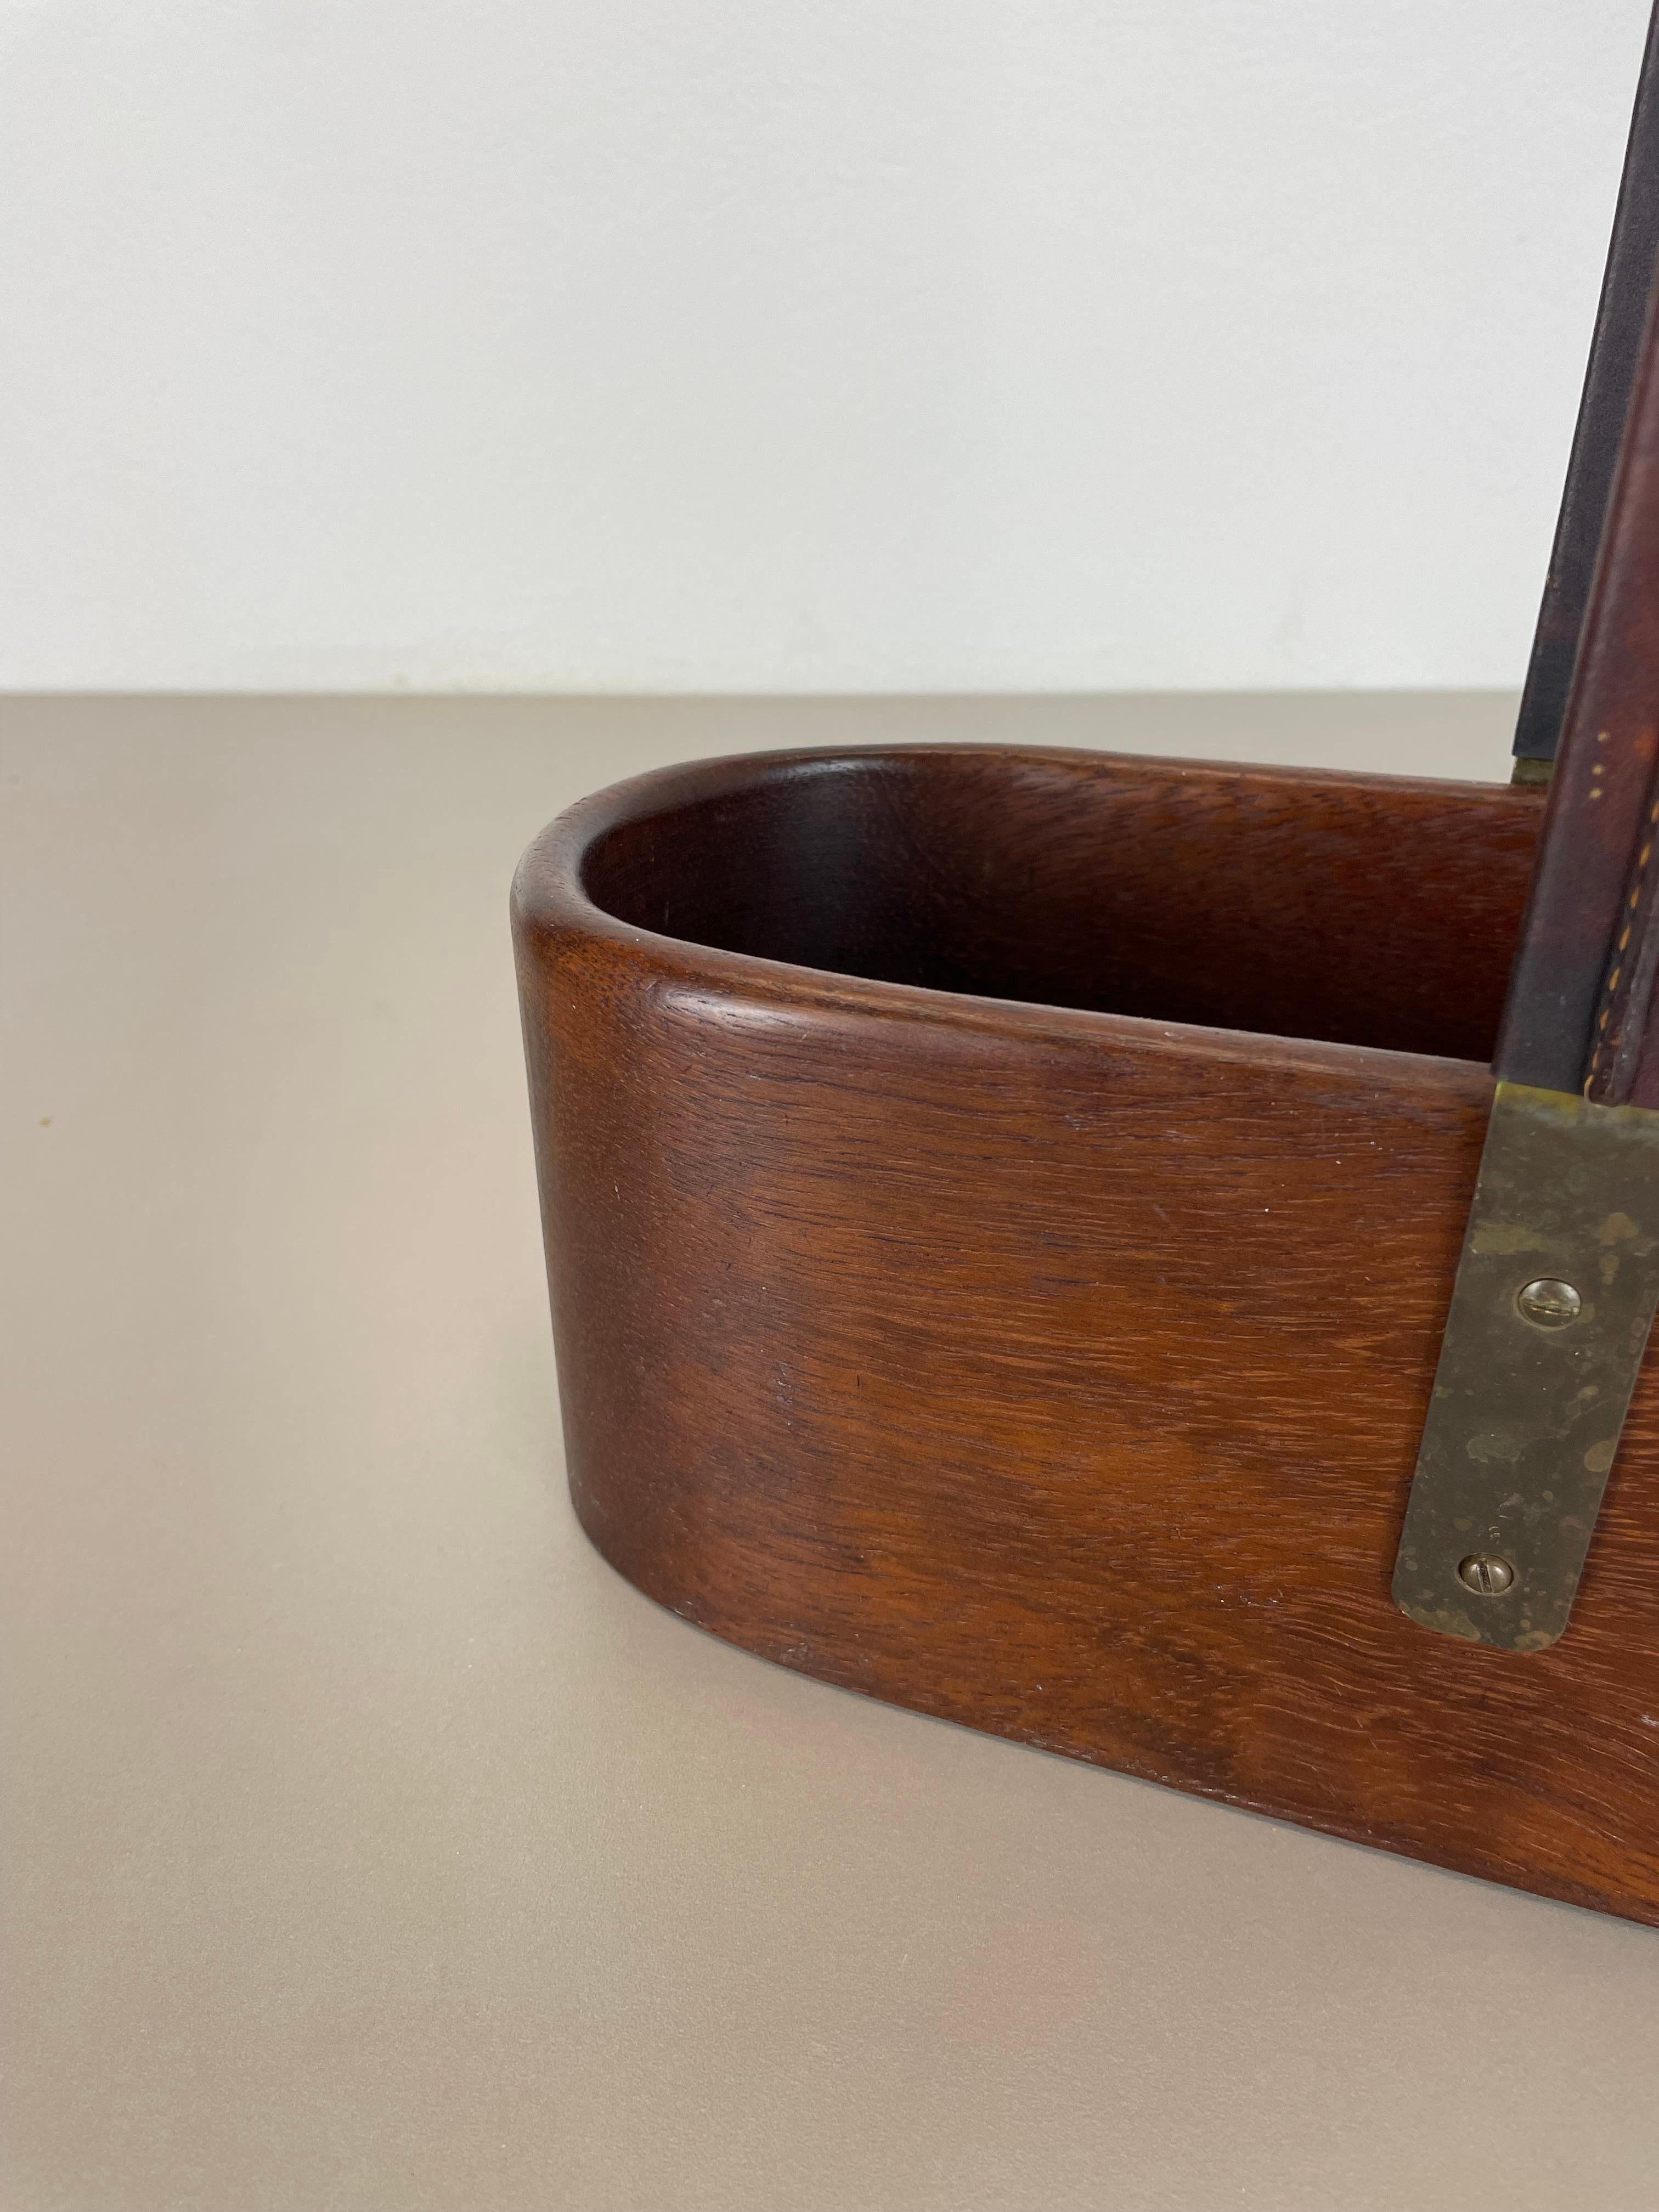 Austrian Teak Bottle Holder with Brass and Leather Handle by Carl Auböck, Austria, 1950s For Sale